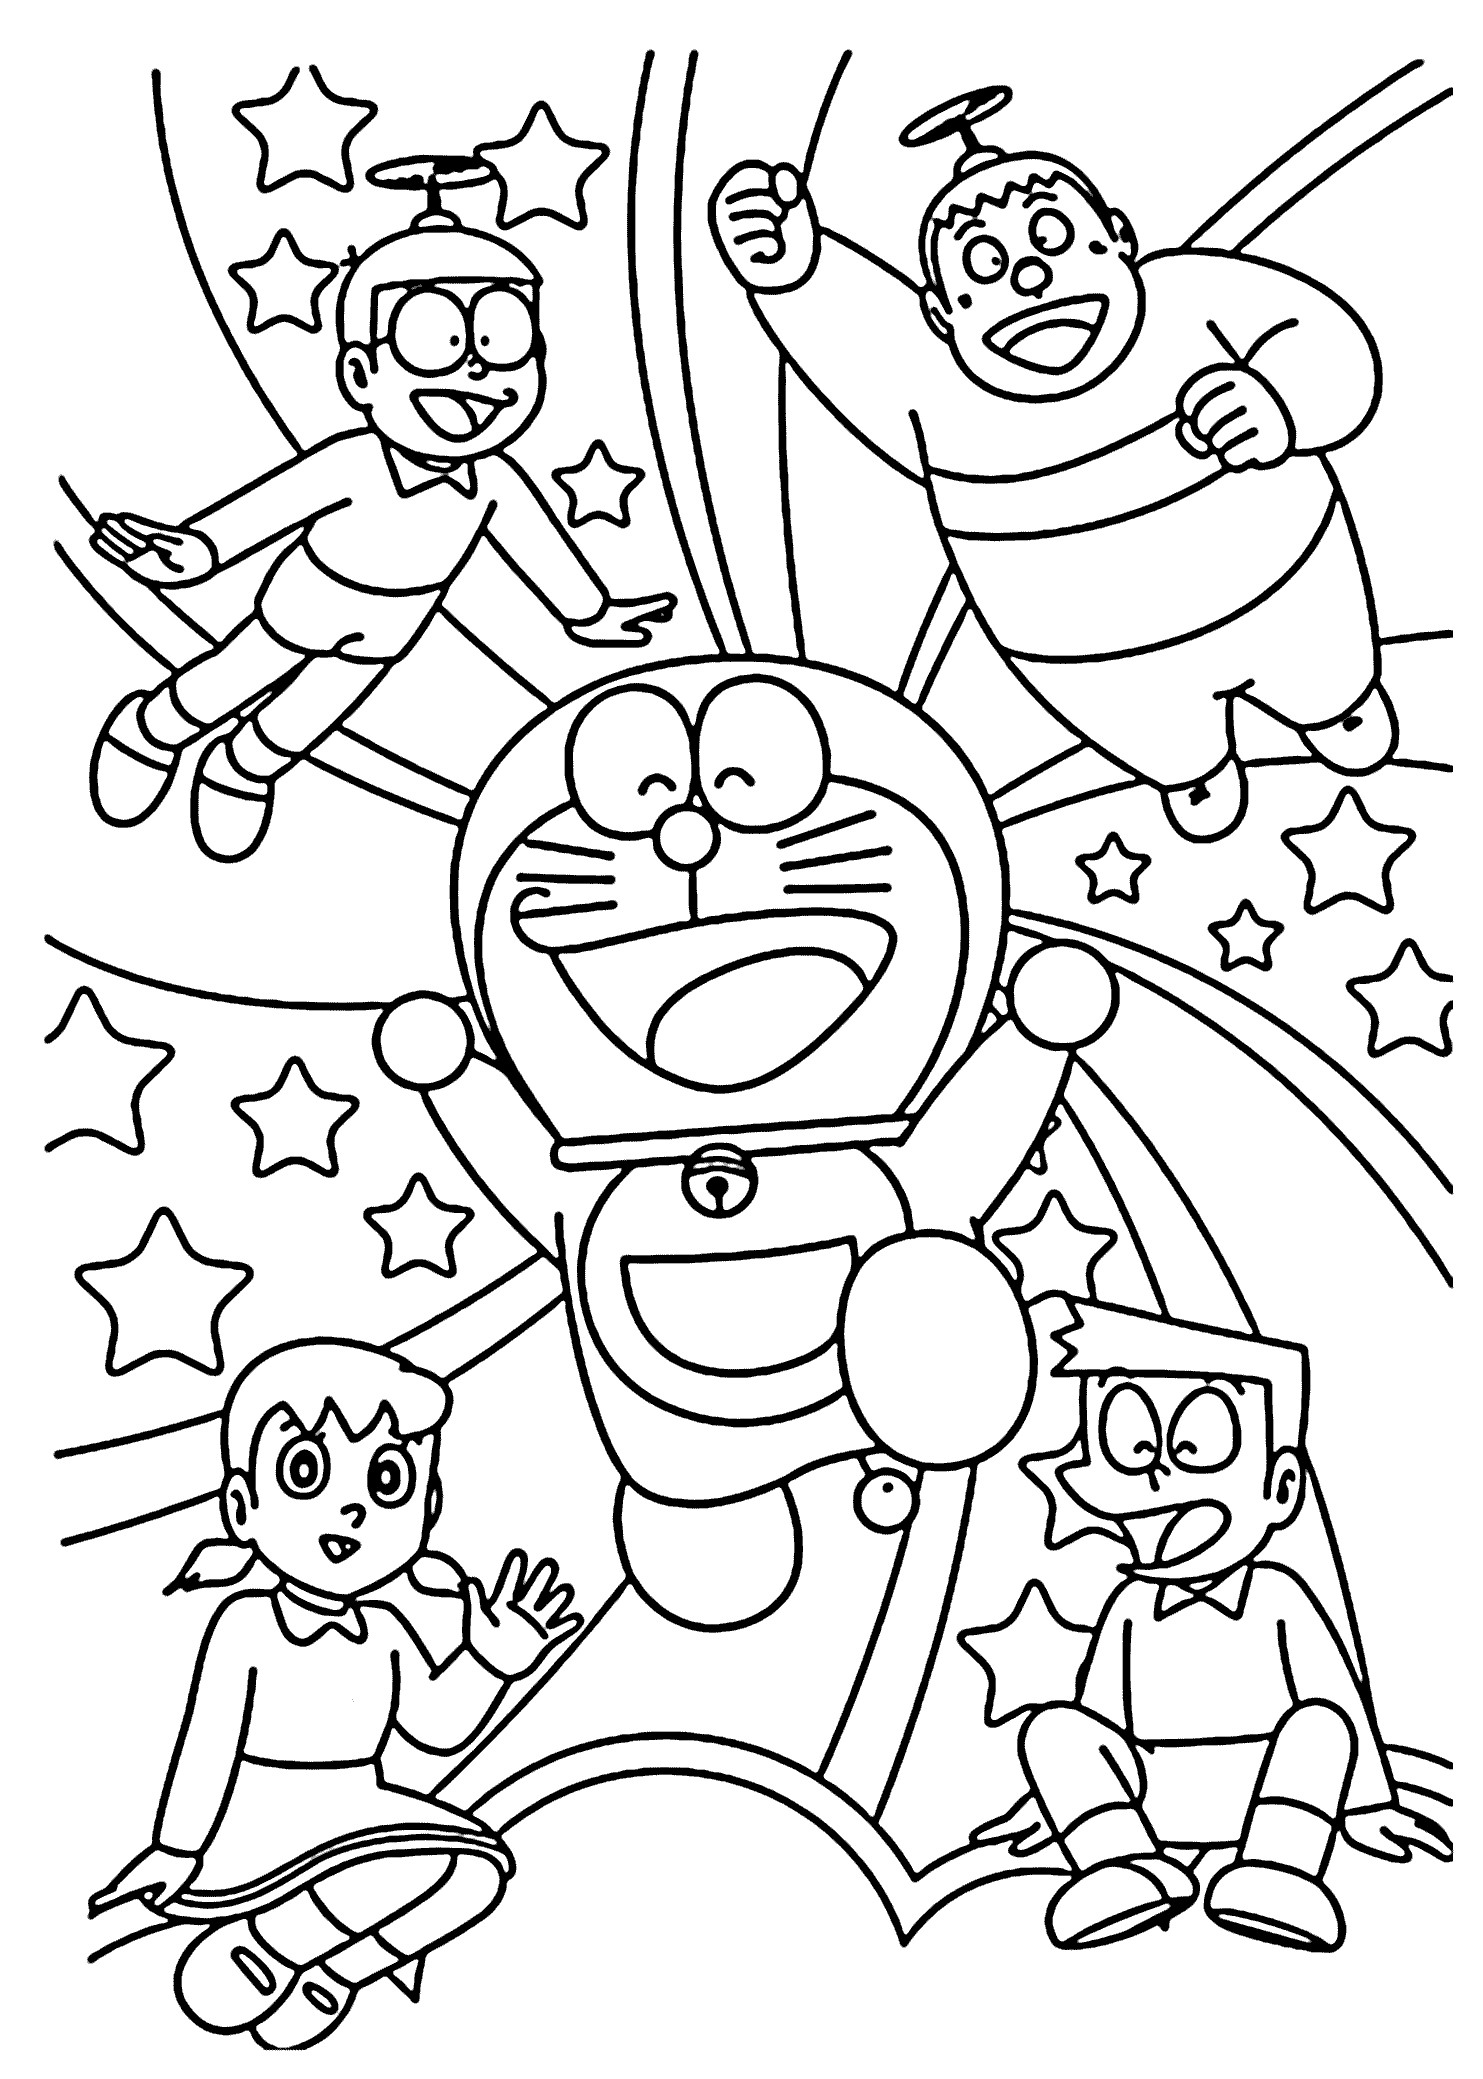 Coloring Pages To Color Online
 Doraemon Coloring Pages to and print for free